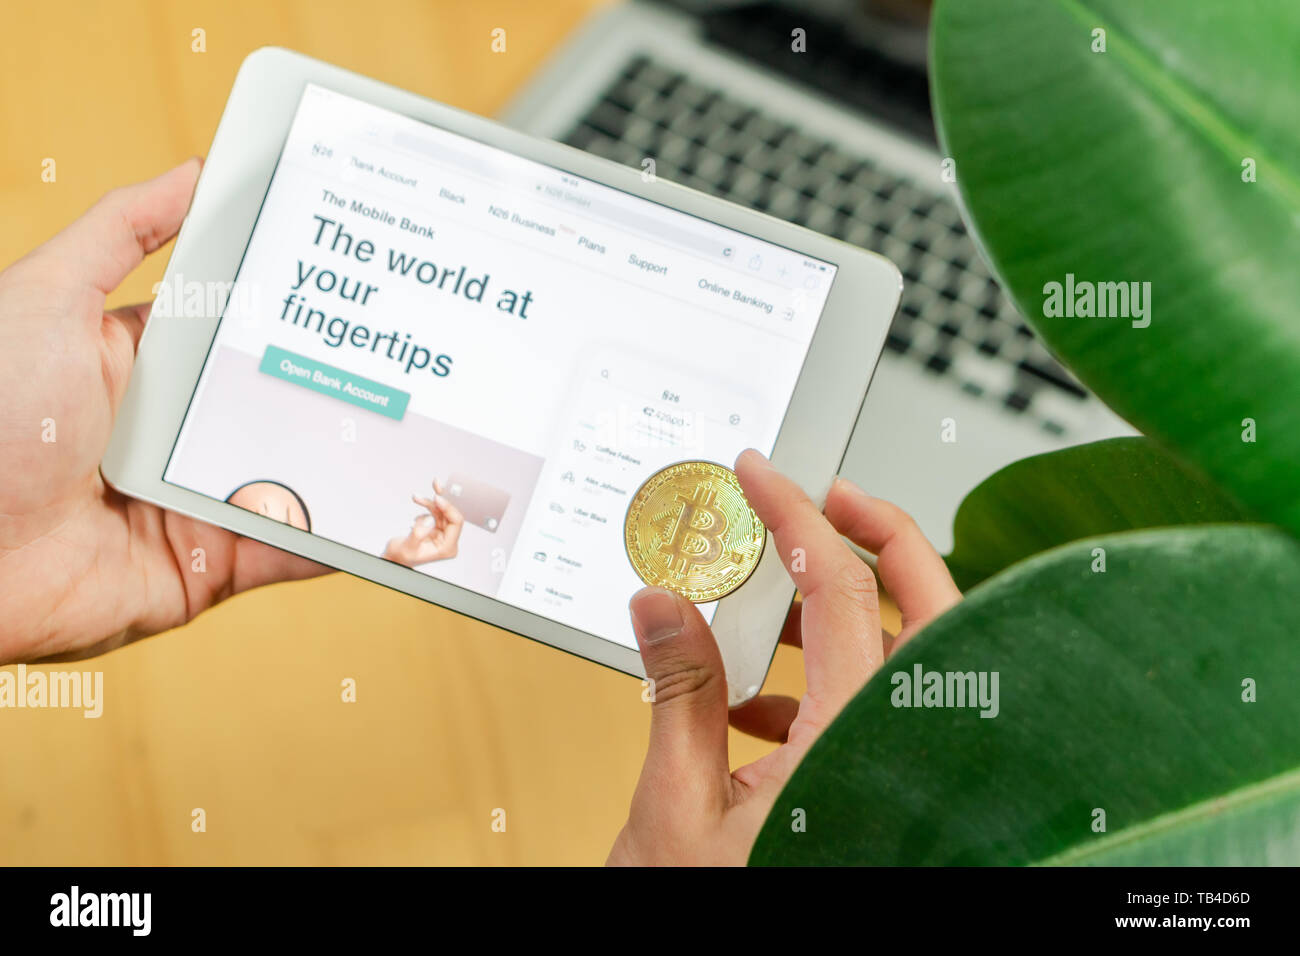 Ljubljana, Slovenia 29.4.2019: Businessman holding computer tablet with opened n26 bank's website and Bitcoin coin on a office desk Stock Photo